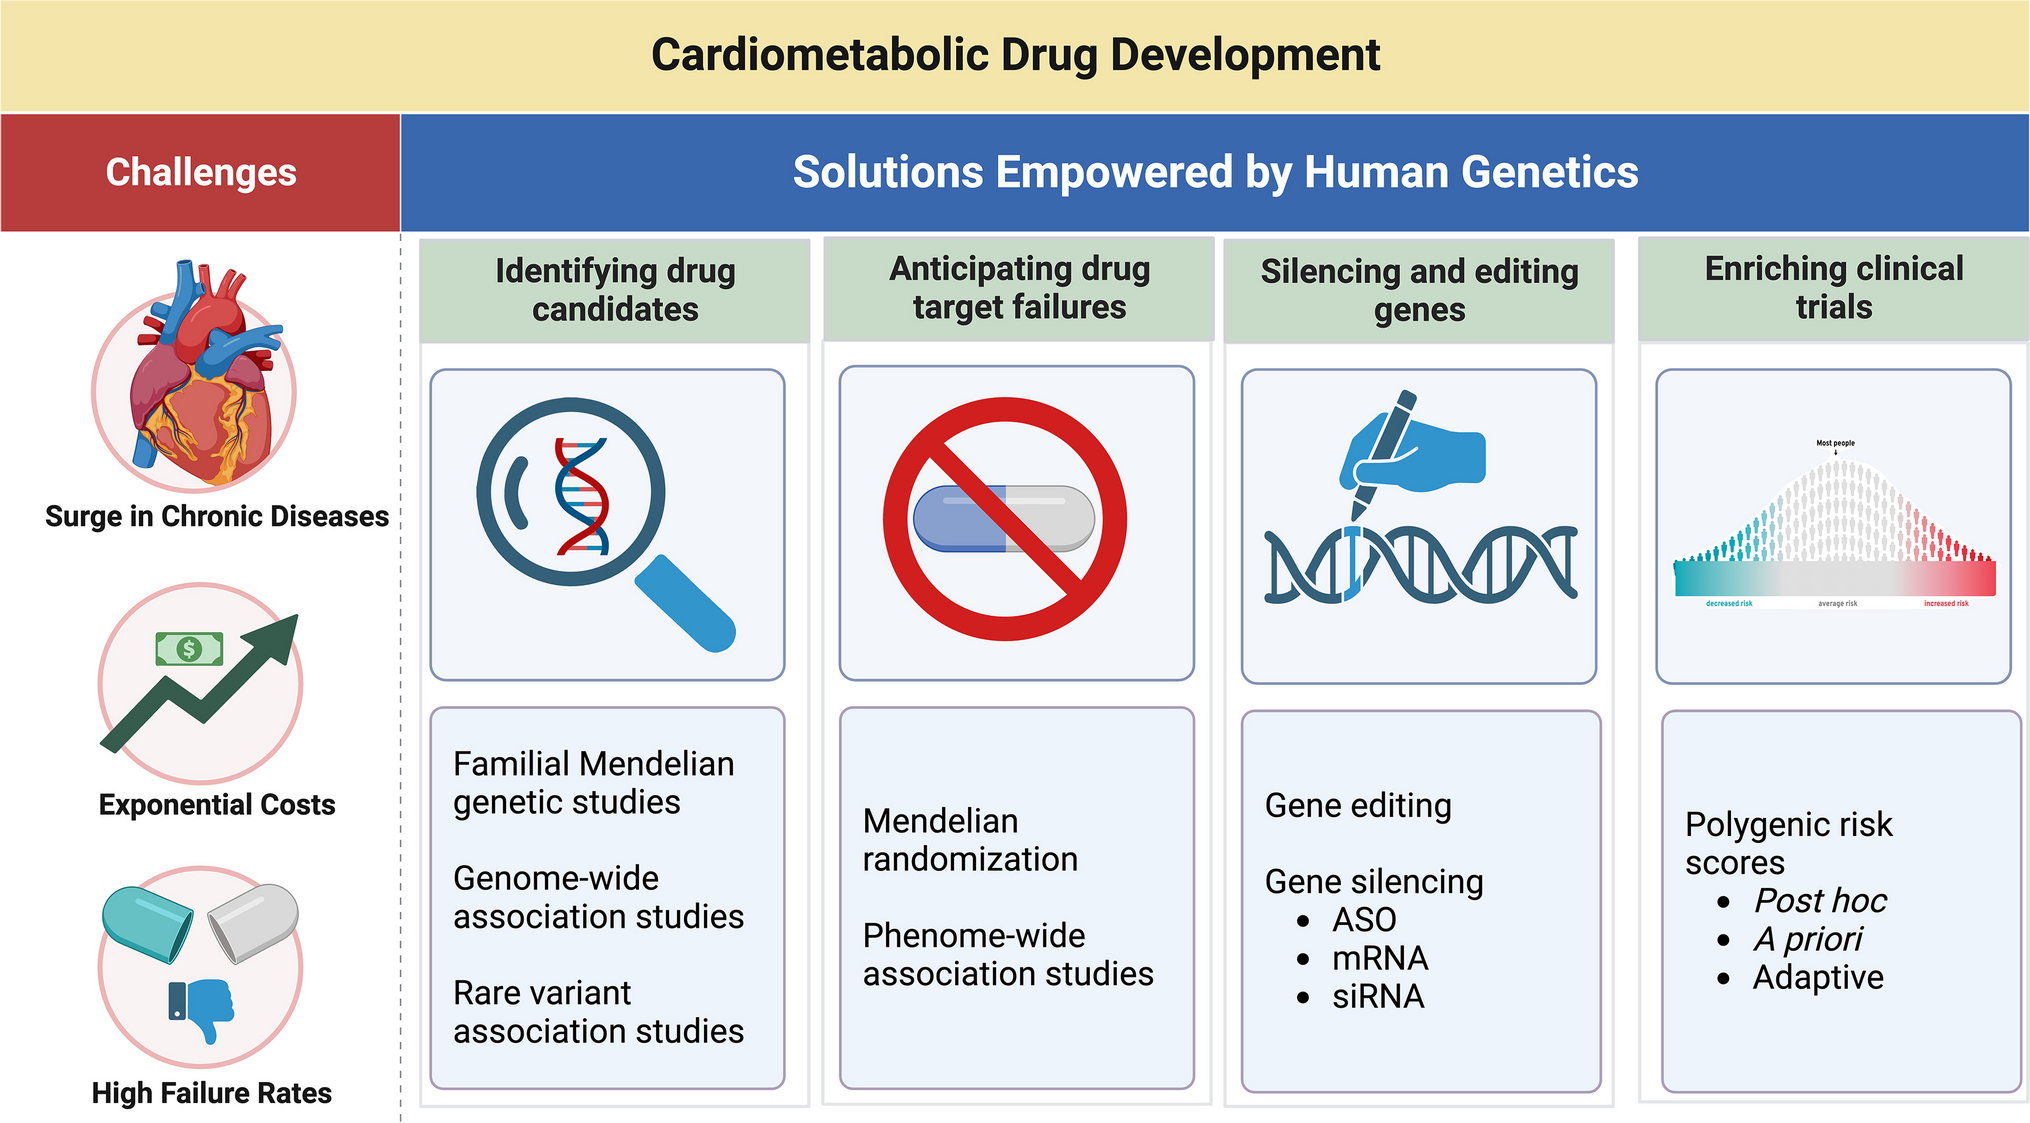 The Role of Genetics in Advancing Cardiometabolic Drug Development